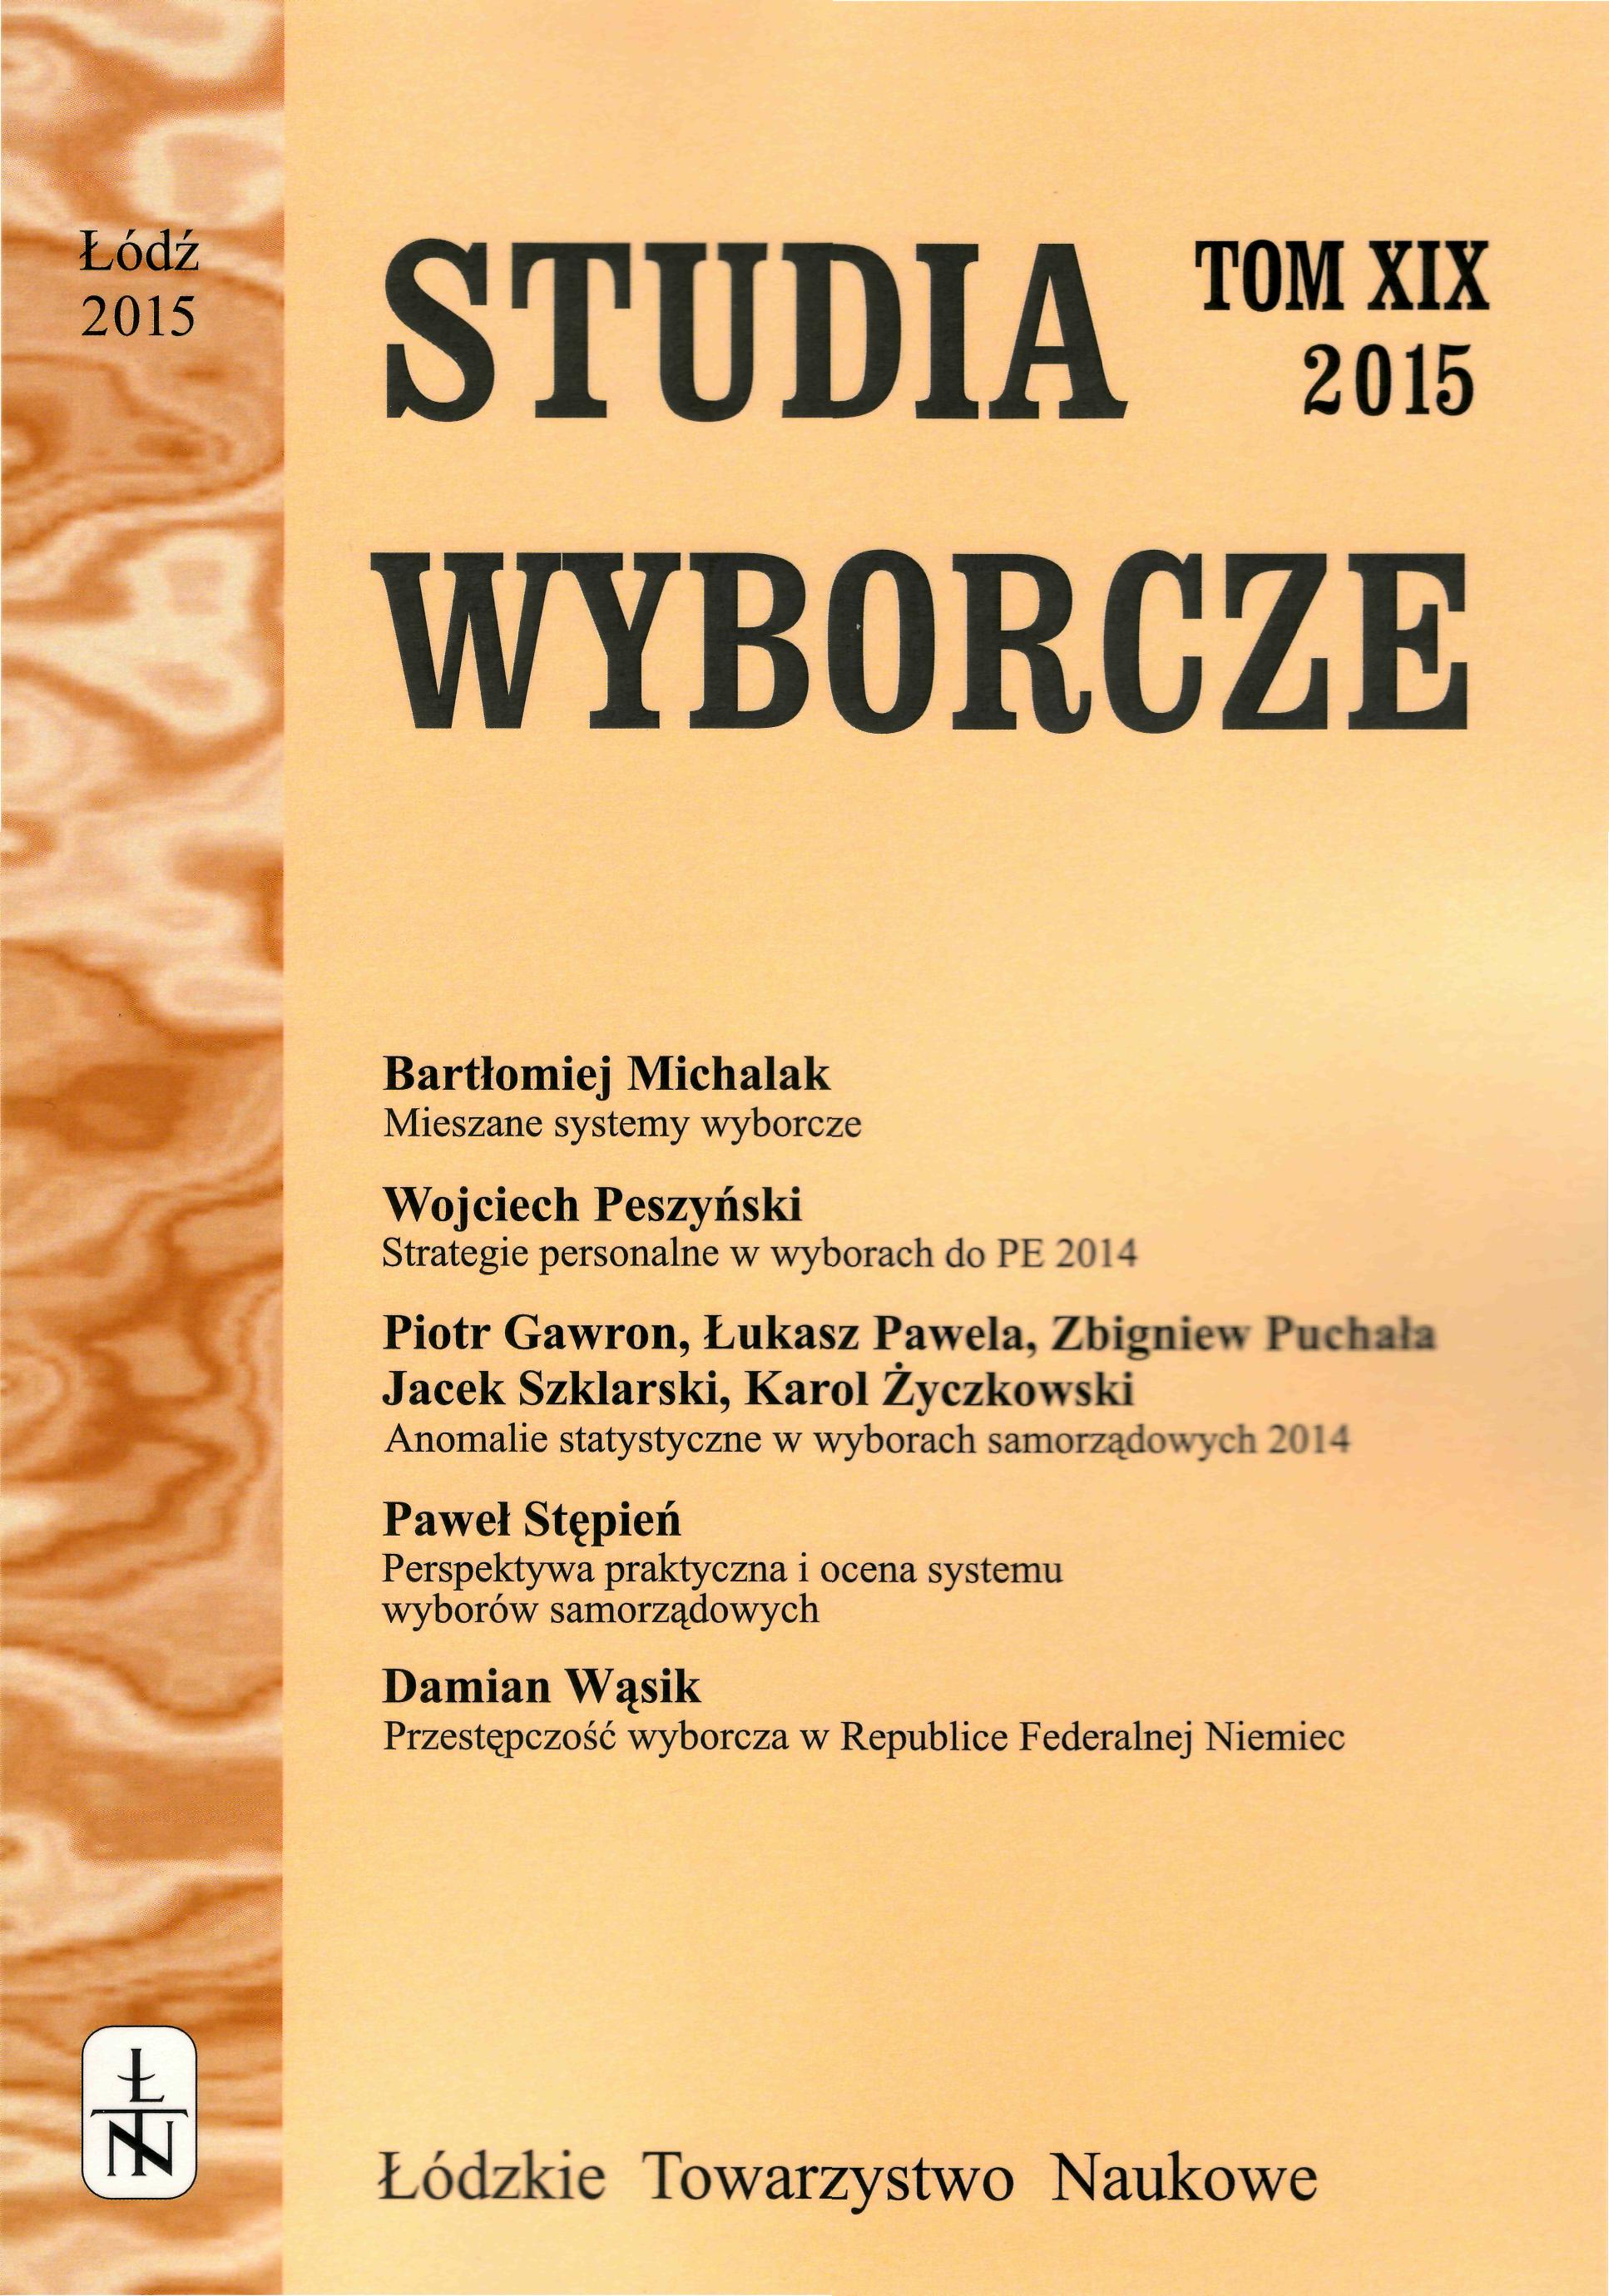 Controversies over the shape of Polish electoral administration Cover Image